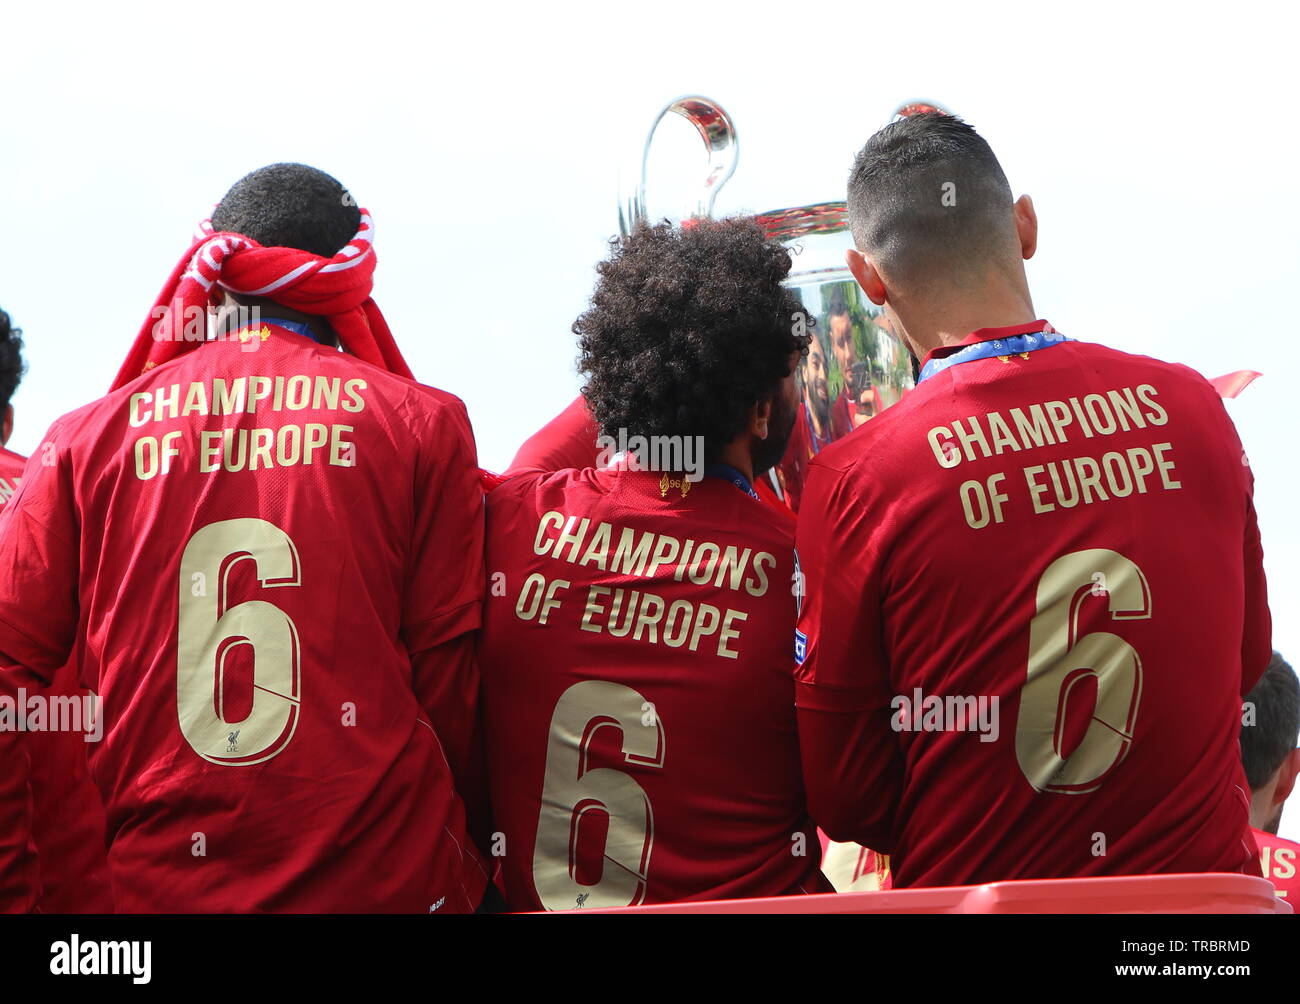 champions of europe liverpool jersey